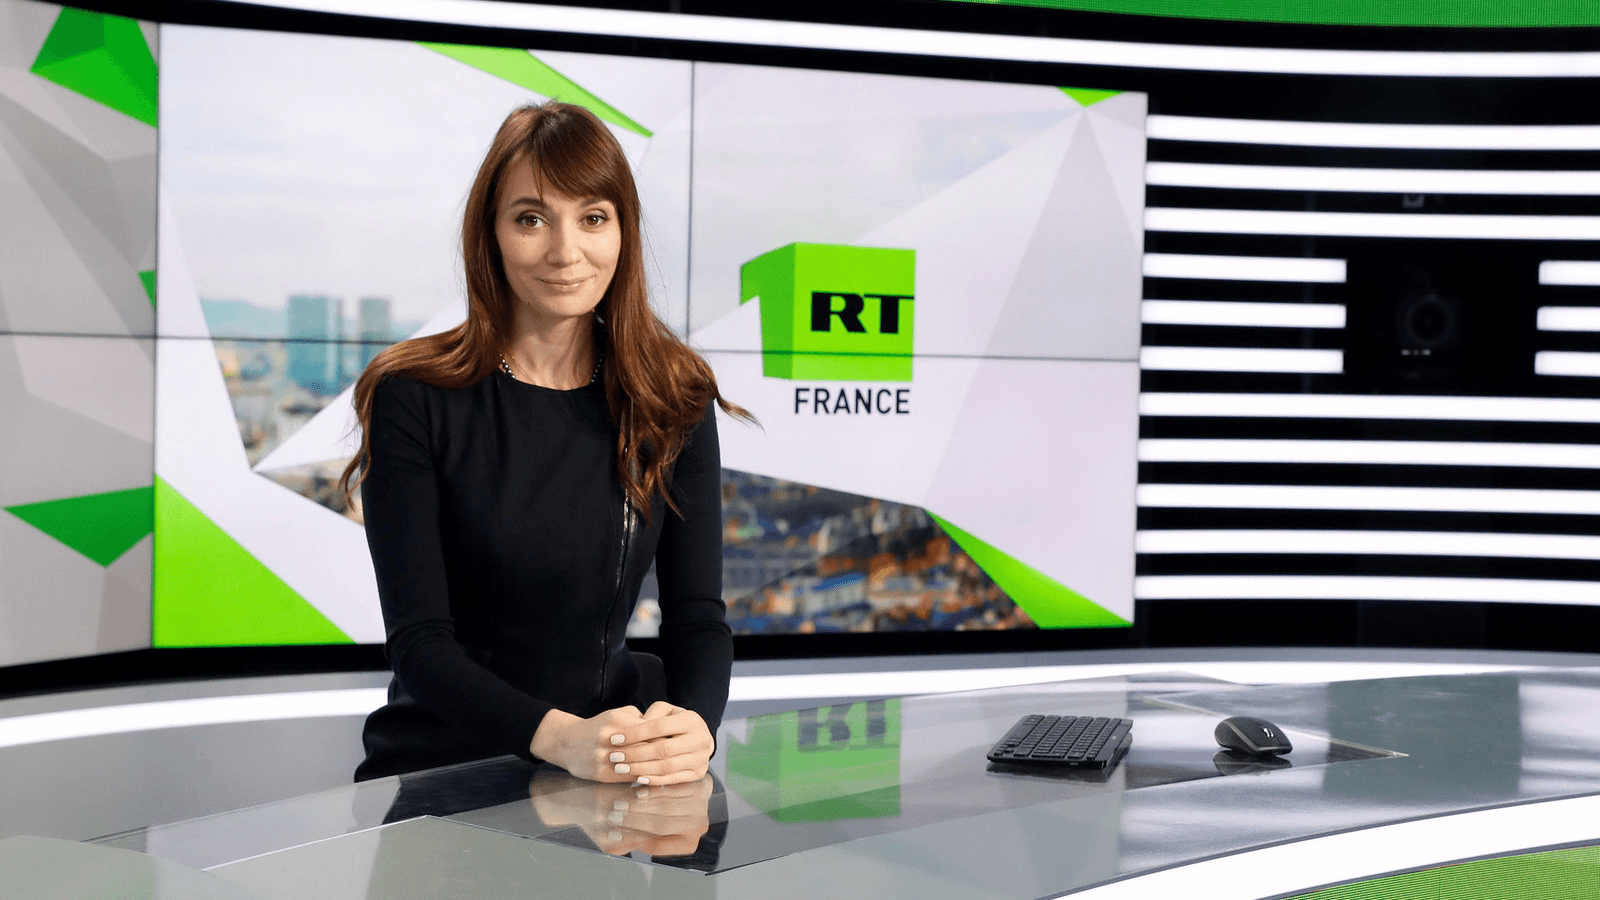 Xenia Fedorova, chief executive of RT France, of the Russian state broadcaster RT, formerly known as "Russia Today,” poses during a visit to their news studio in Boulogne-Billancourt, near Paris, France, Dec. 18, 2017.